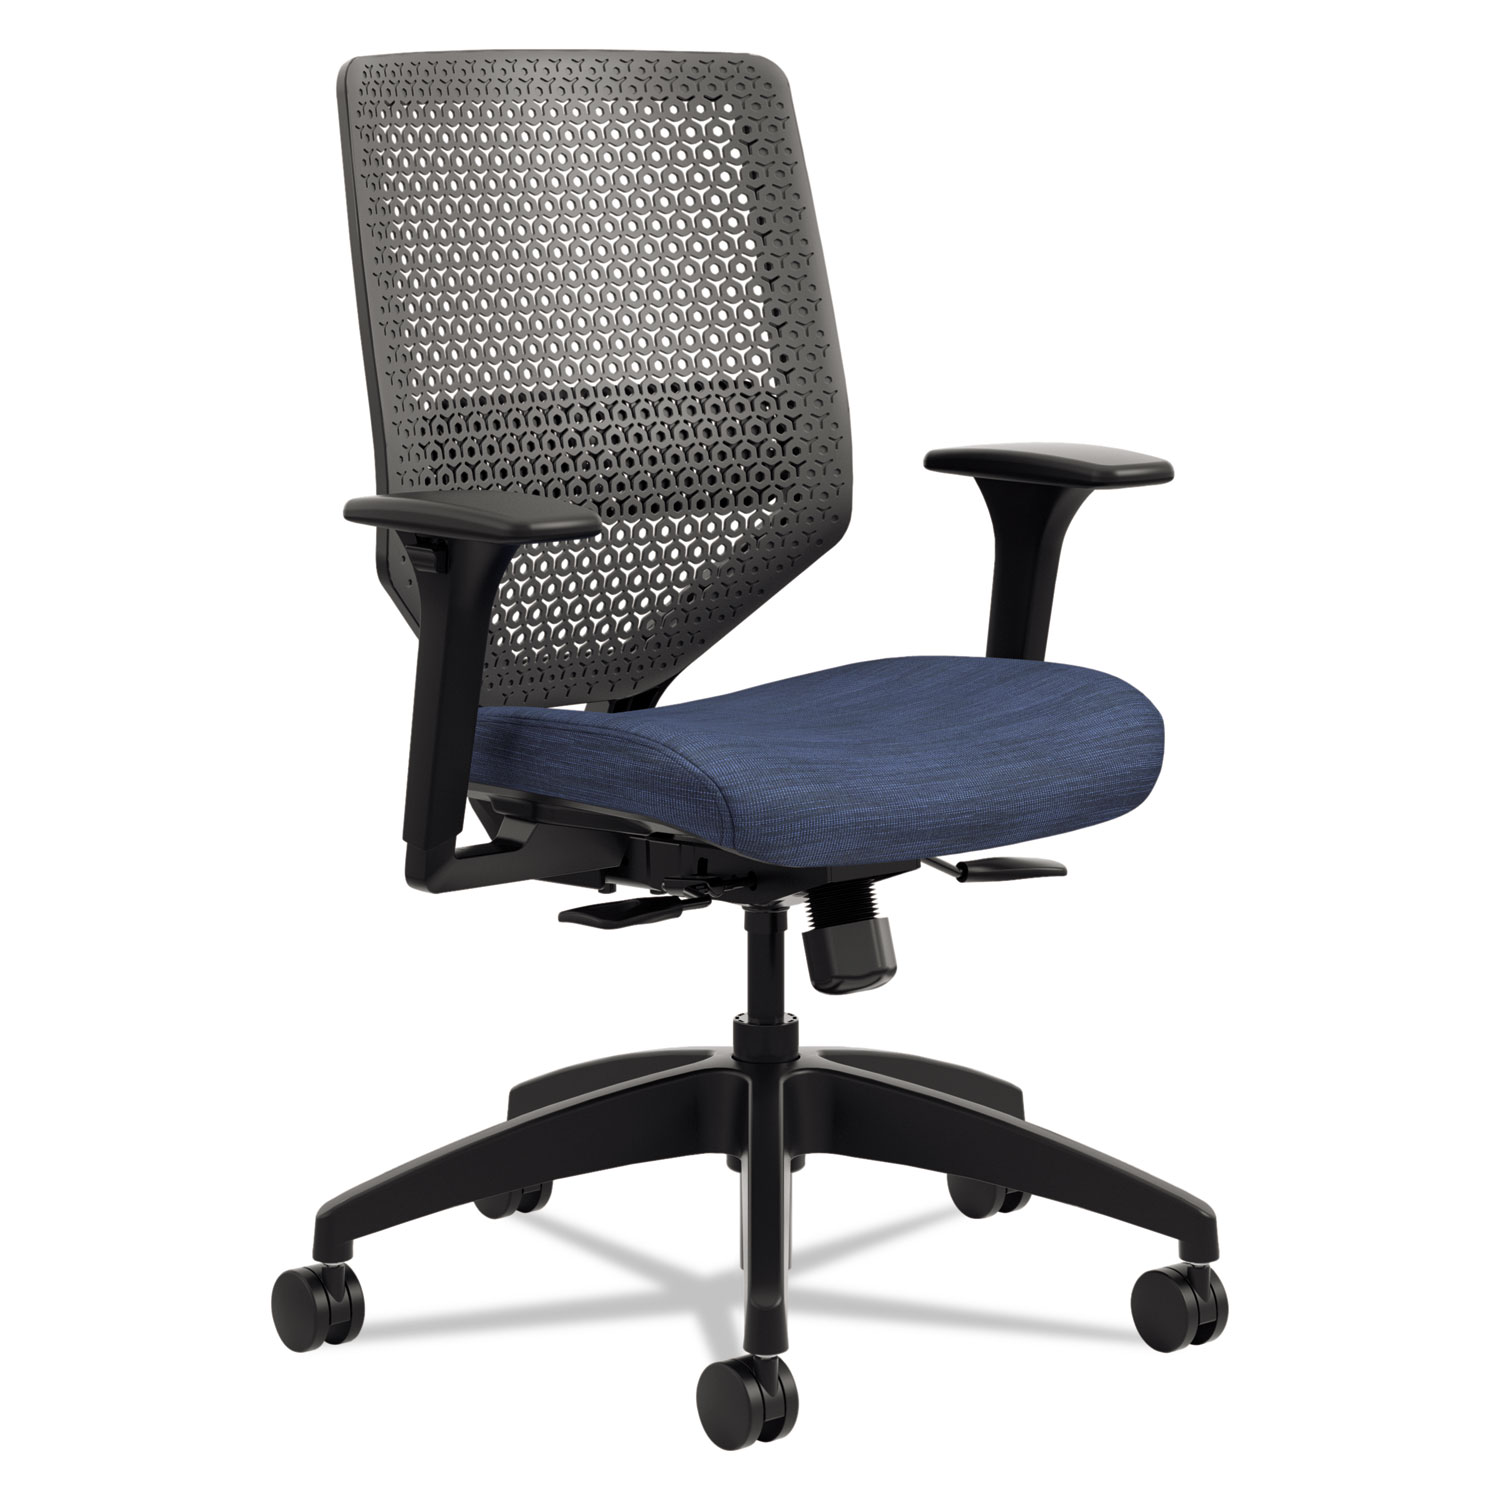  HON SVR1ACLC90TK Solve Series ReActiv Back Task Chair, Supports up to 300 lbs., Midnight Seat/Charcoal Back, Black Base (HONSVR1ACLC90TK) 